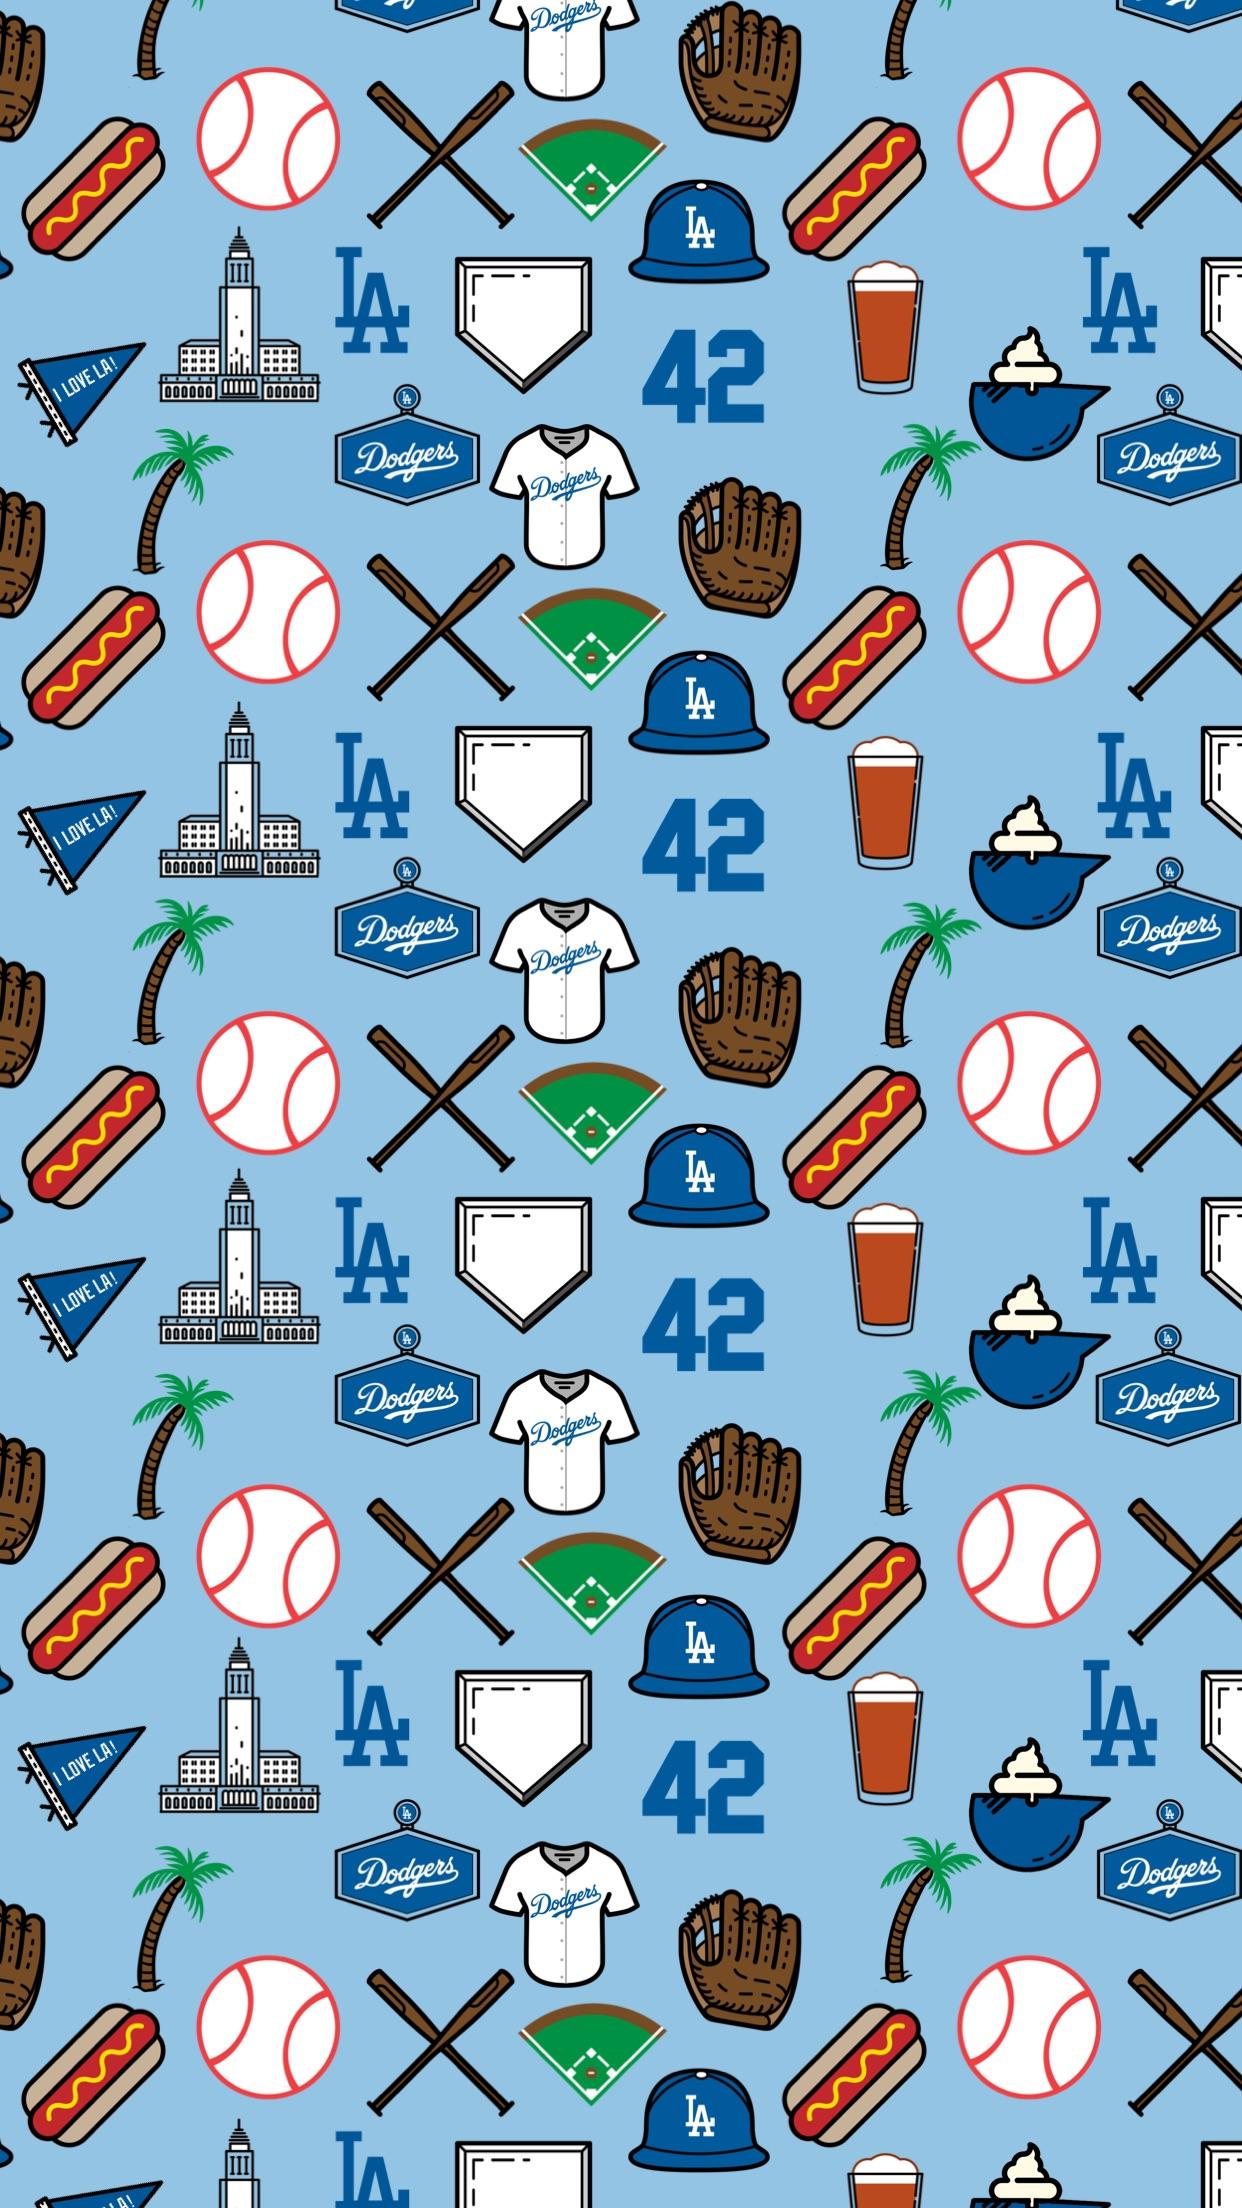 Here's a wallpaper that I think incapsulates the best things about LA, Dodgers, Baseball and Dodger Stadium!